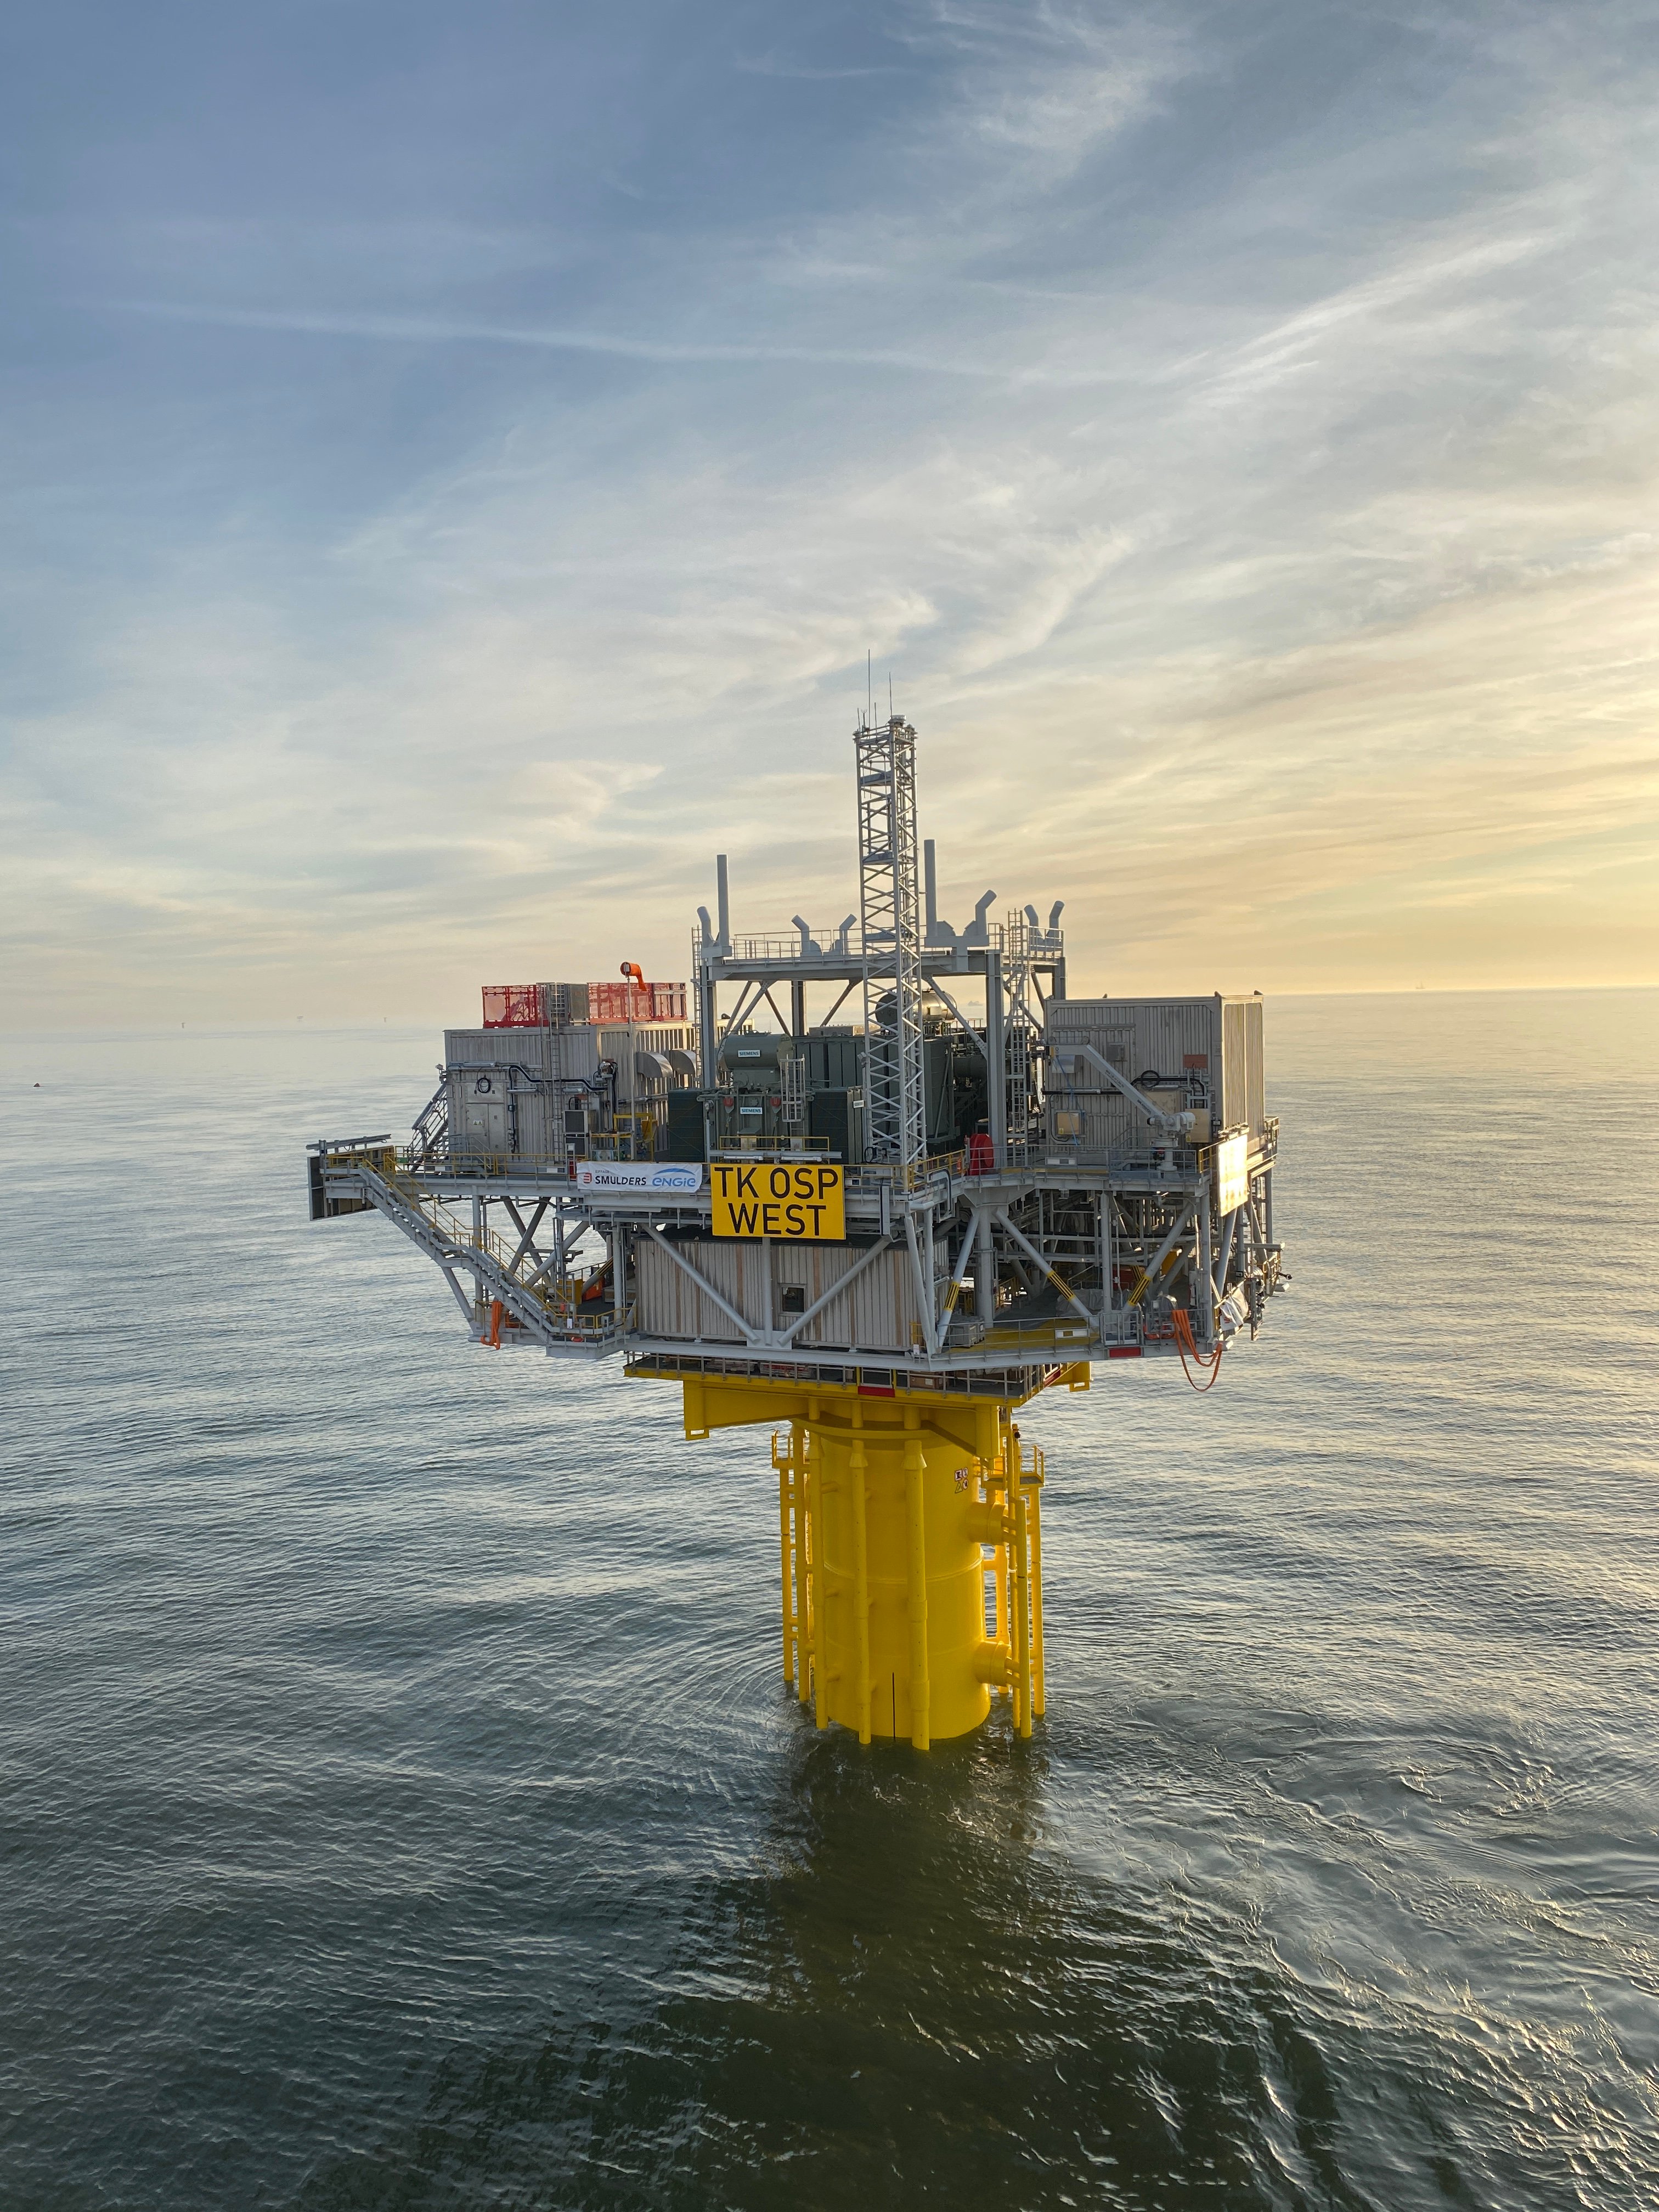 A photo of Triton Knoll offshore substation OSP West fully installed at its offshore location